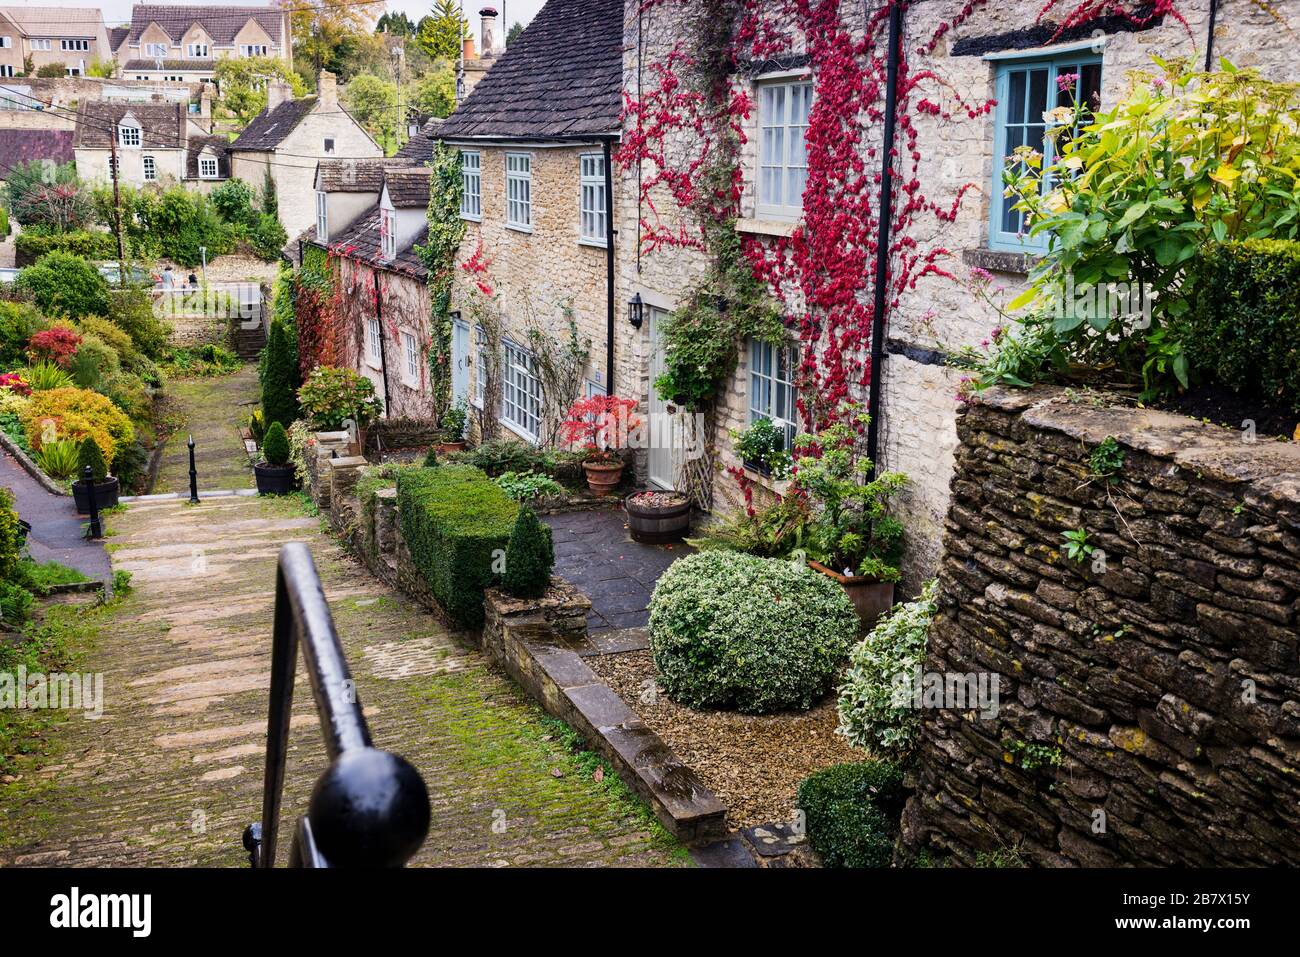 Chipping Steps in Tetbury, England. Stock Photo